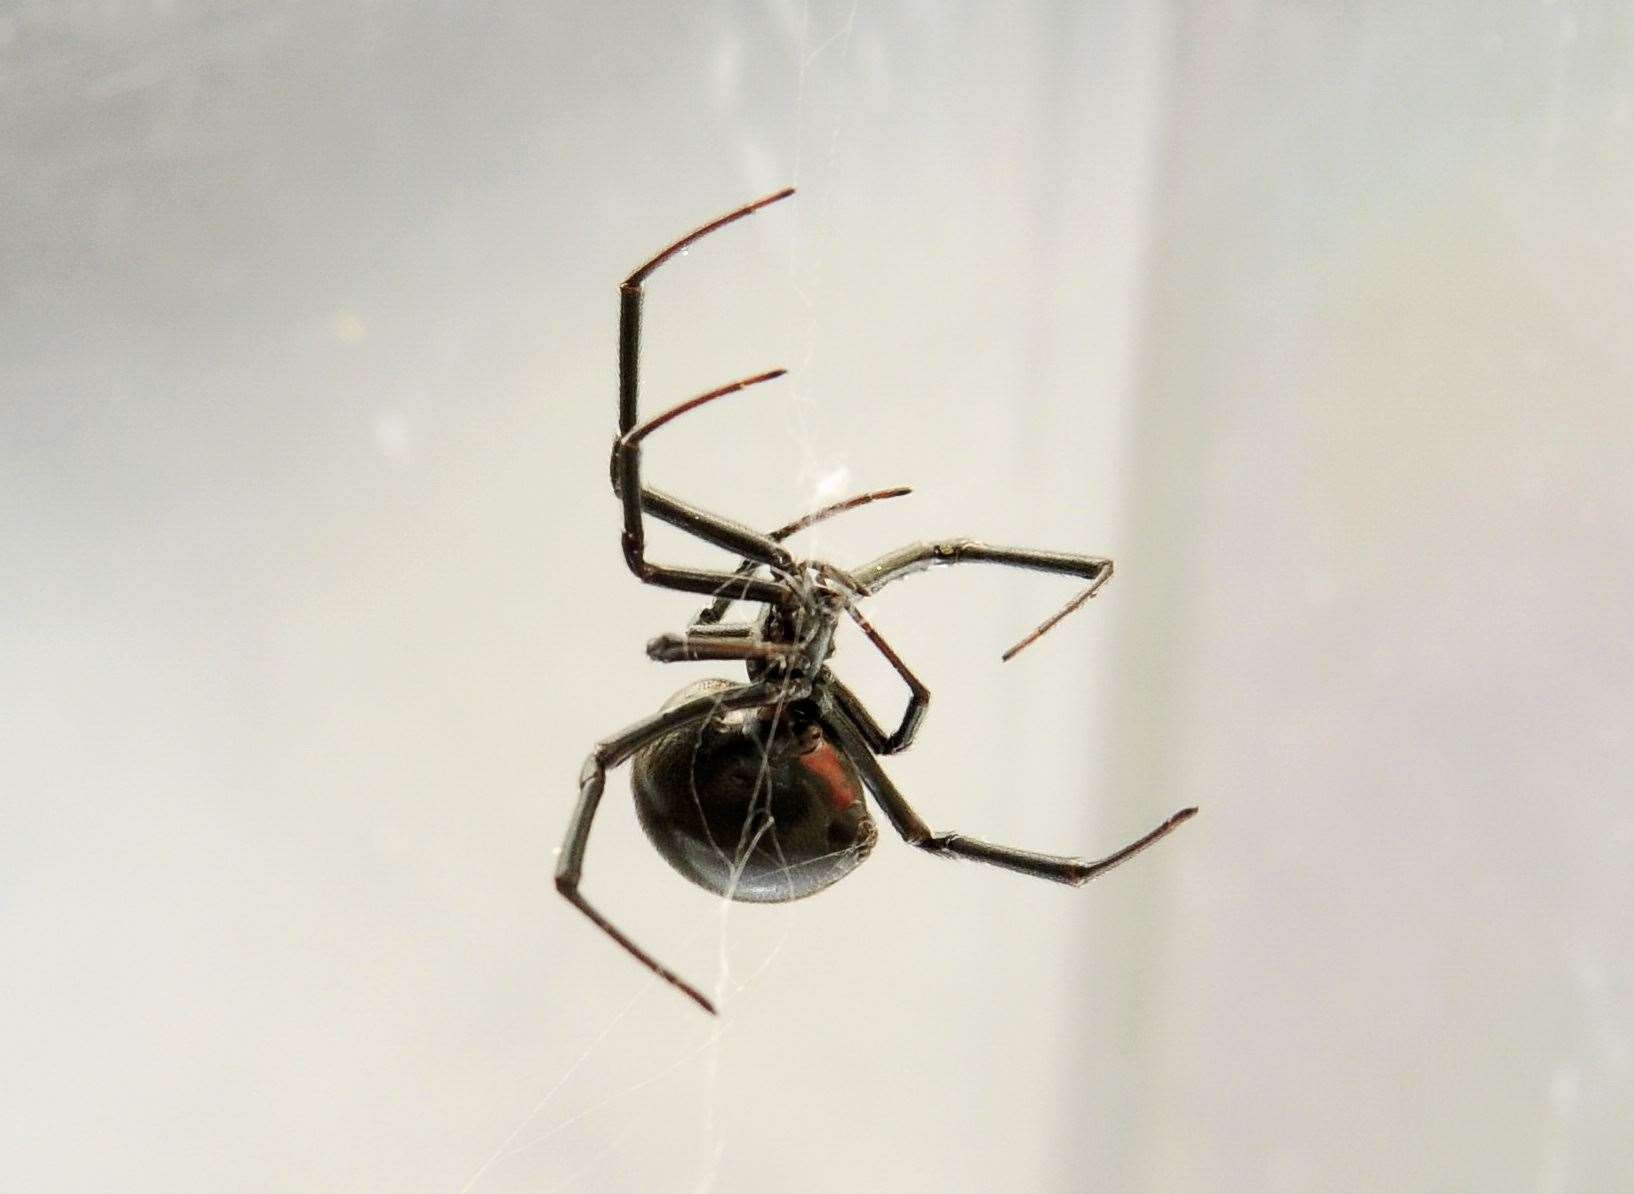 A Black Widow spider. Picture by: Simon Hildrew